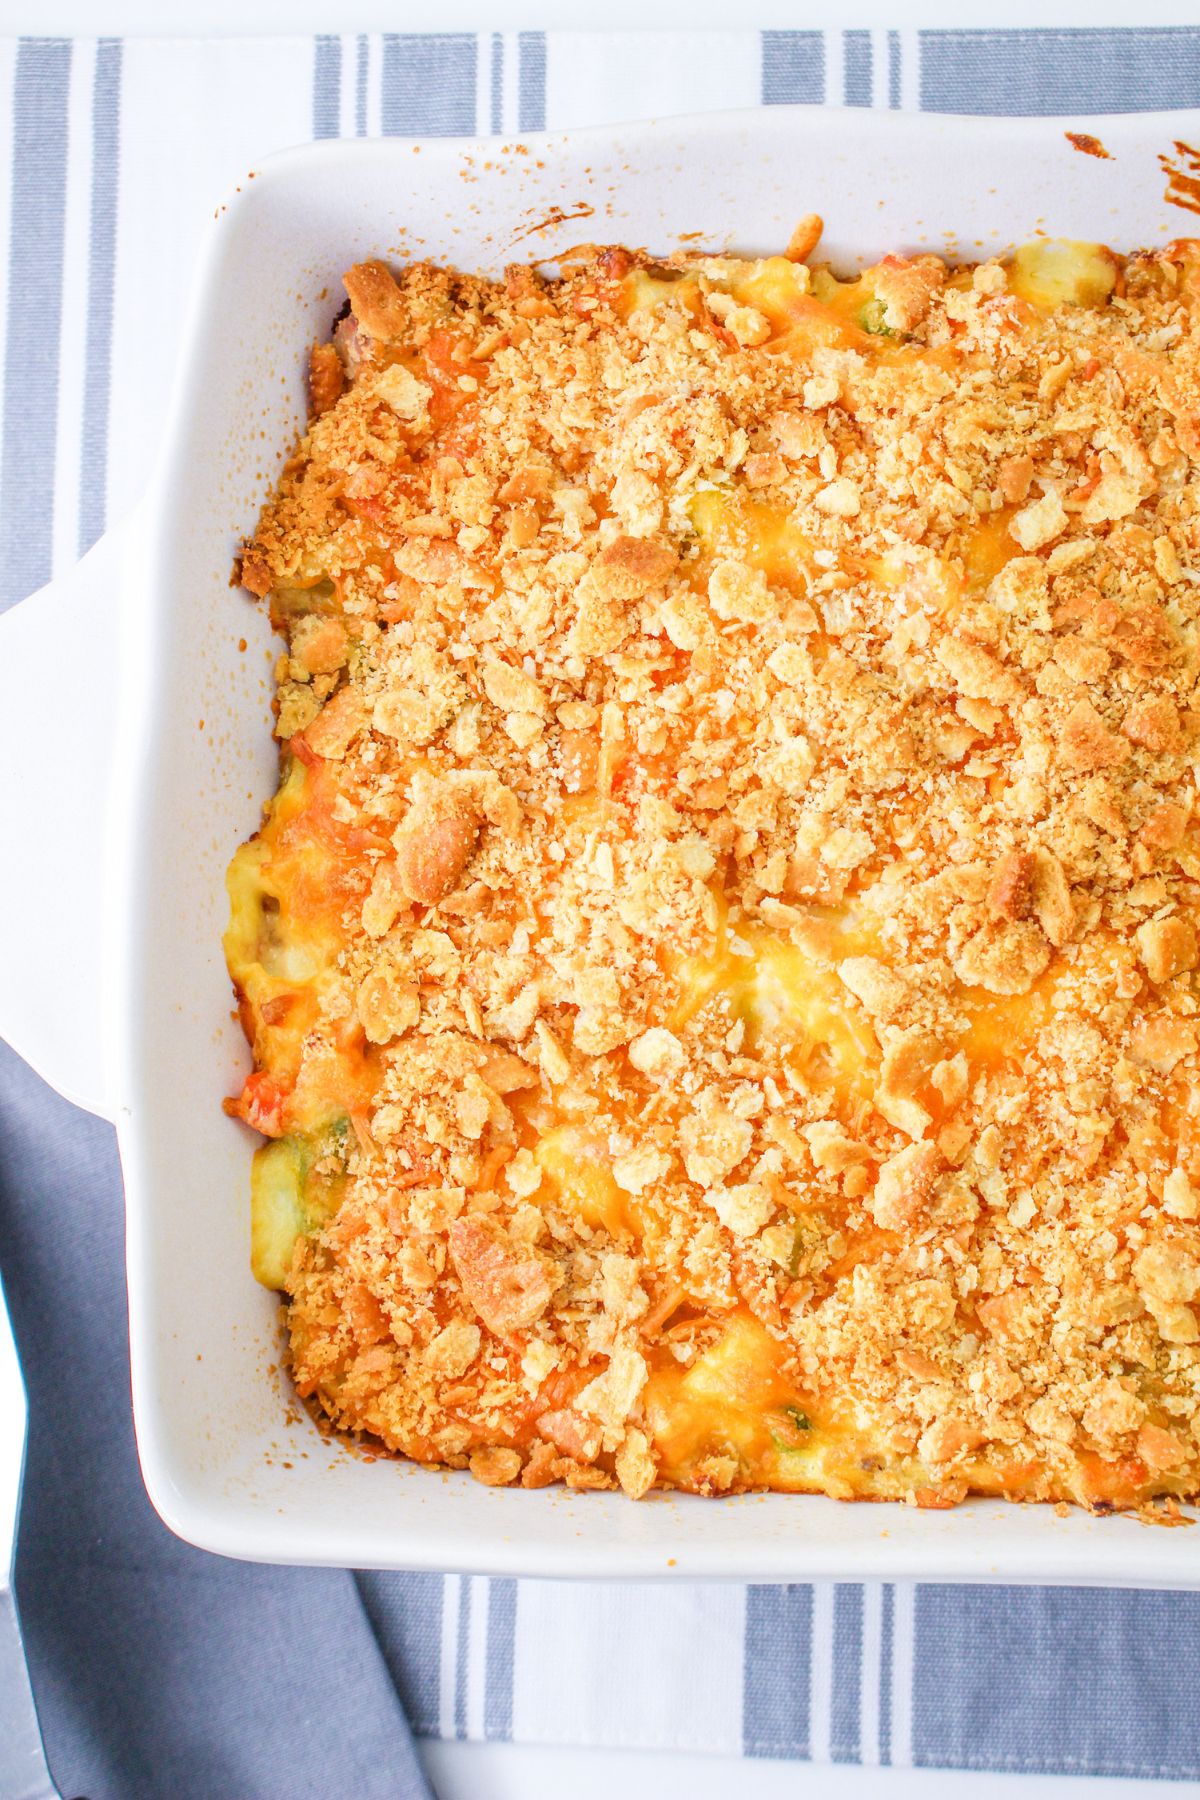 uncut casserole in a baking dish topped with crackers and cheese